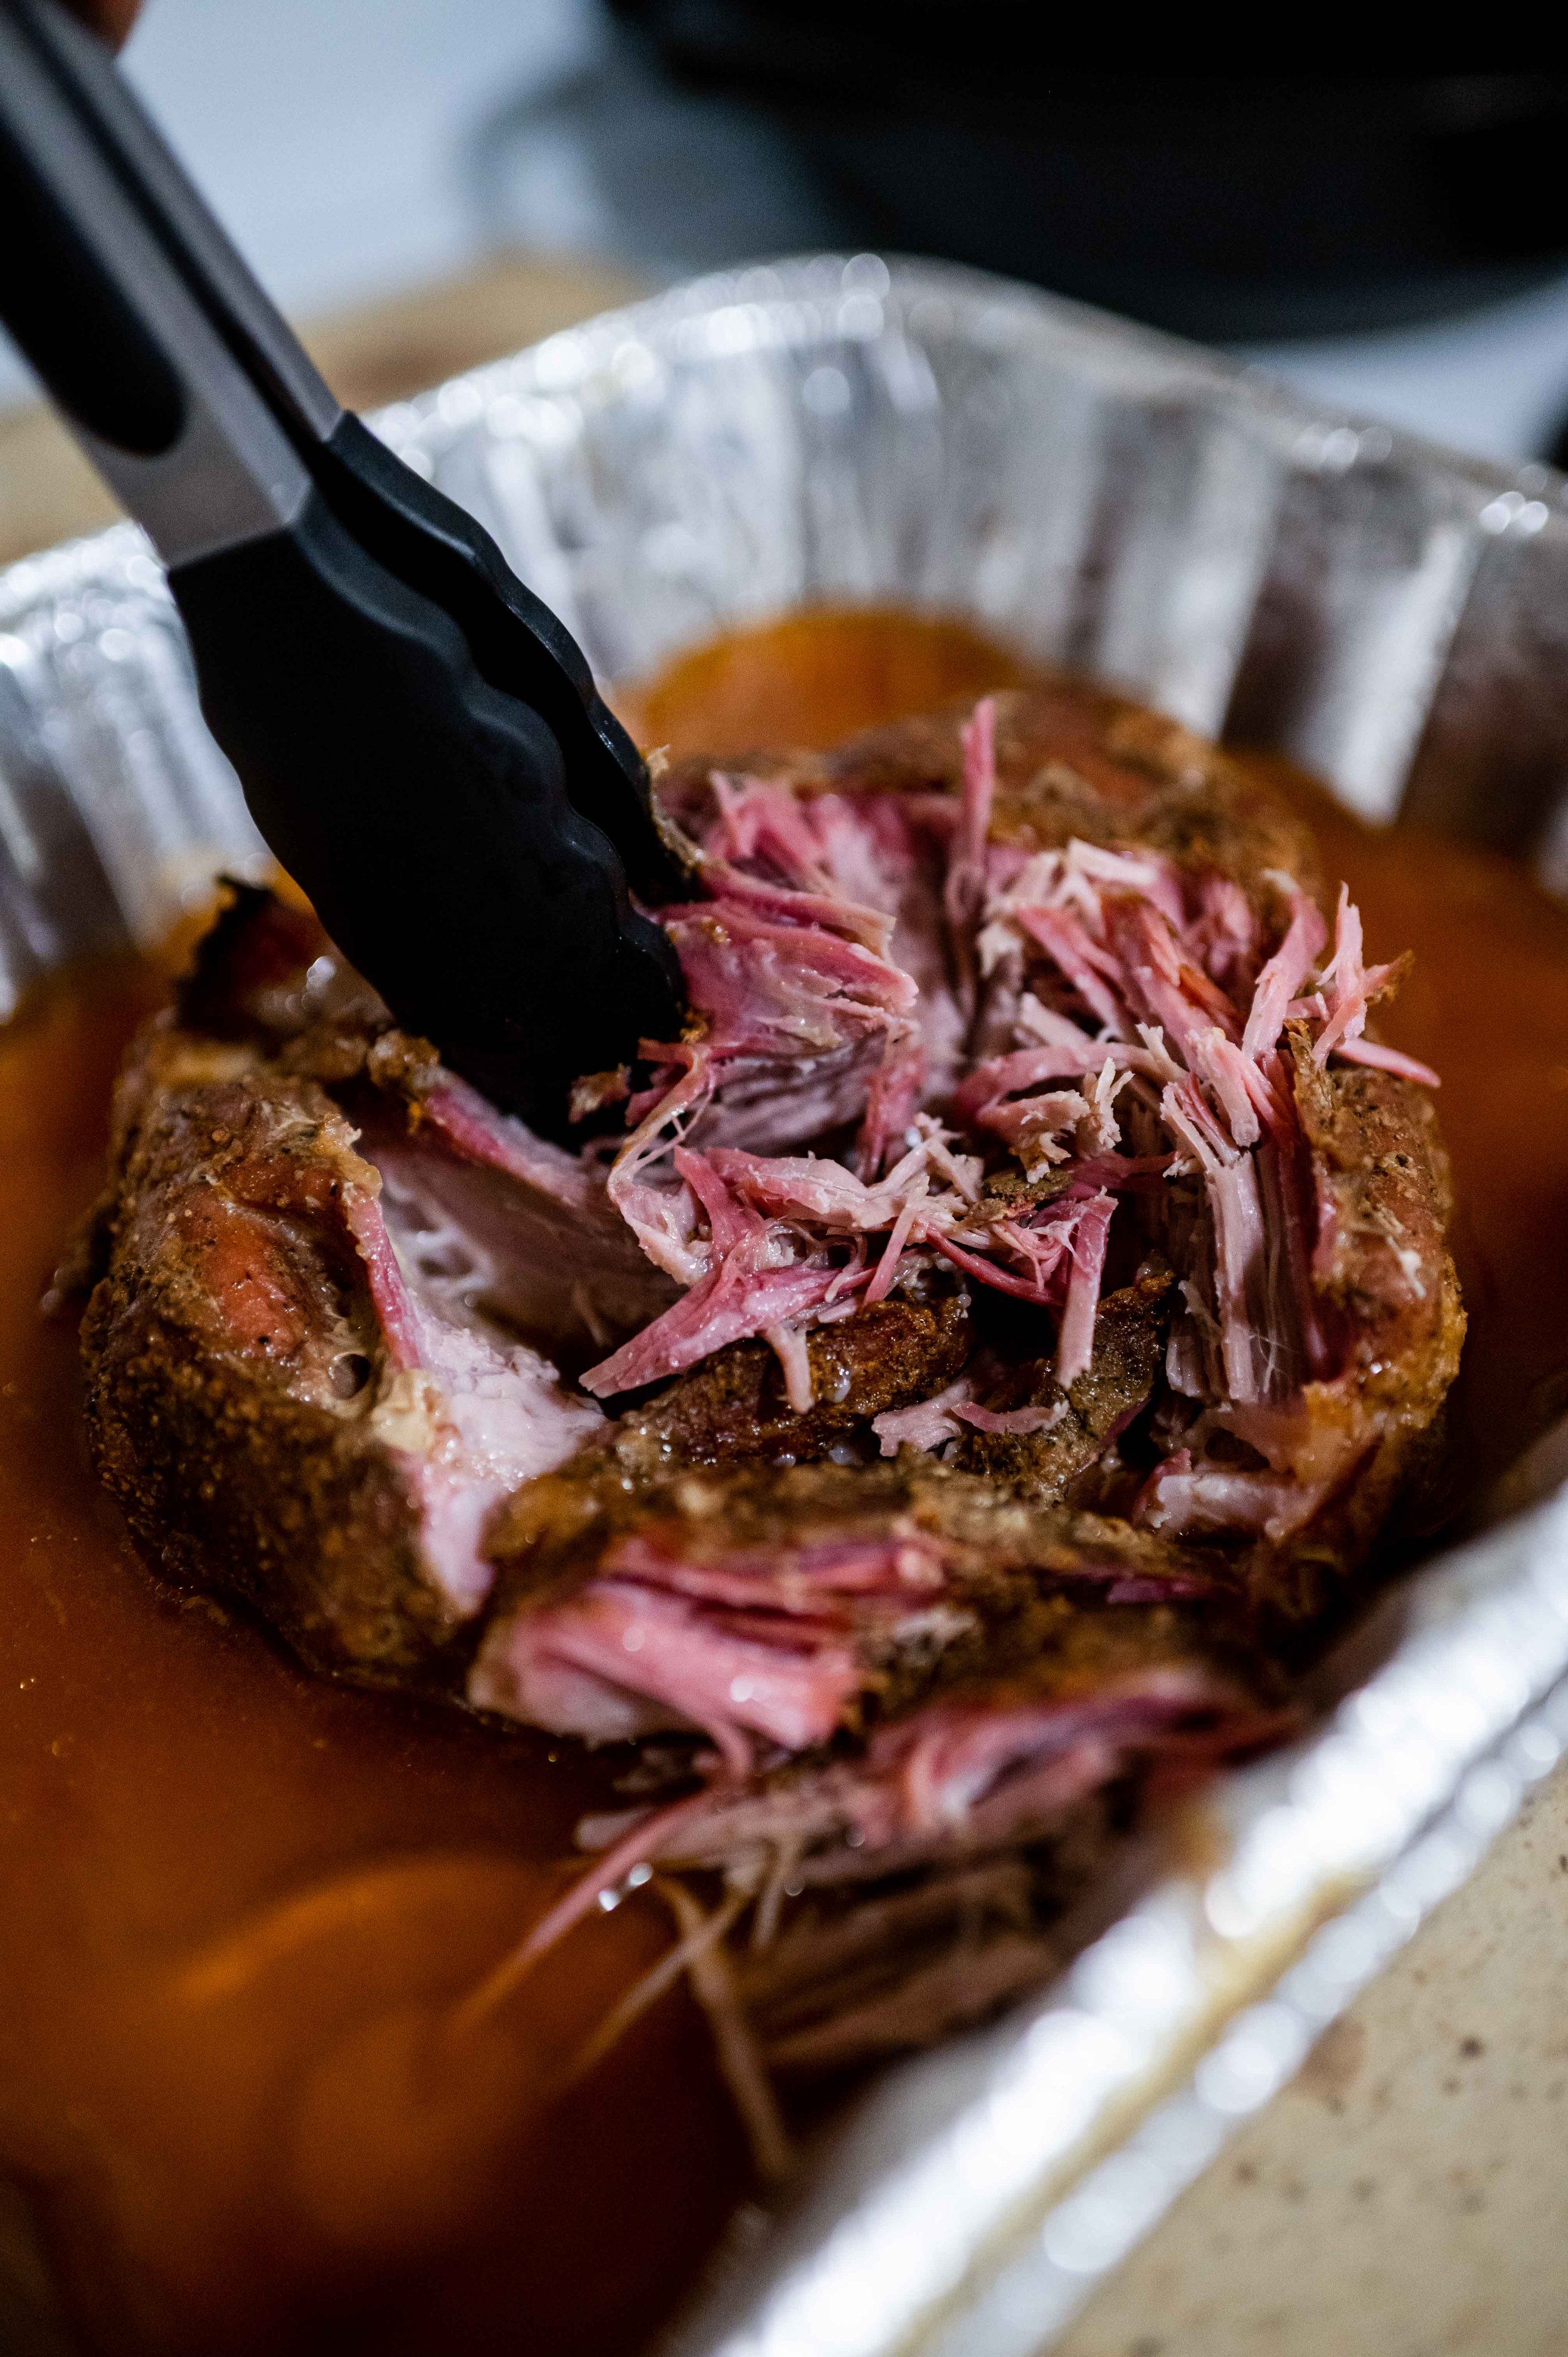 Texas Style Smoked Pulled Pork Recipe - Traeger Pulled Pork - Summer BBQ Pulled Pork Recipe - Smoked Pulled Pork Slider Sandwiches - Meals for Families - BBQ for a Crowd